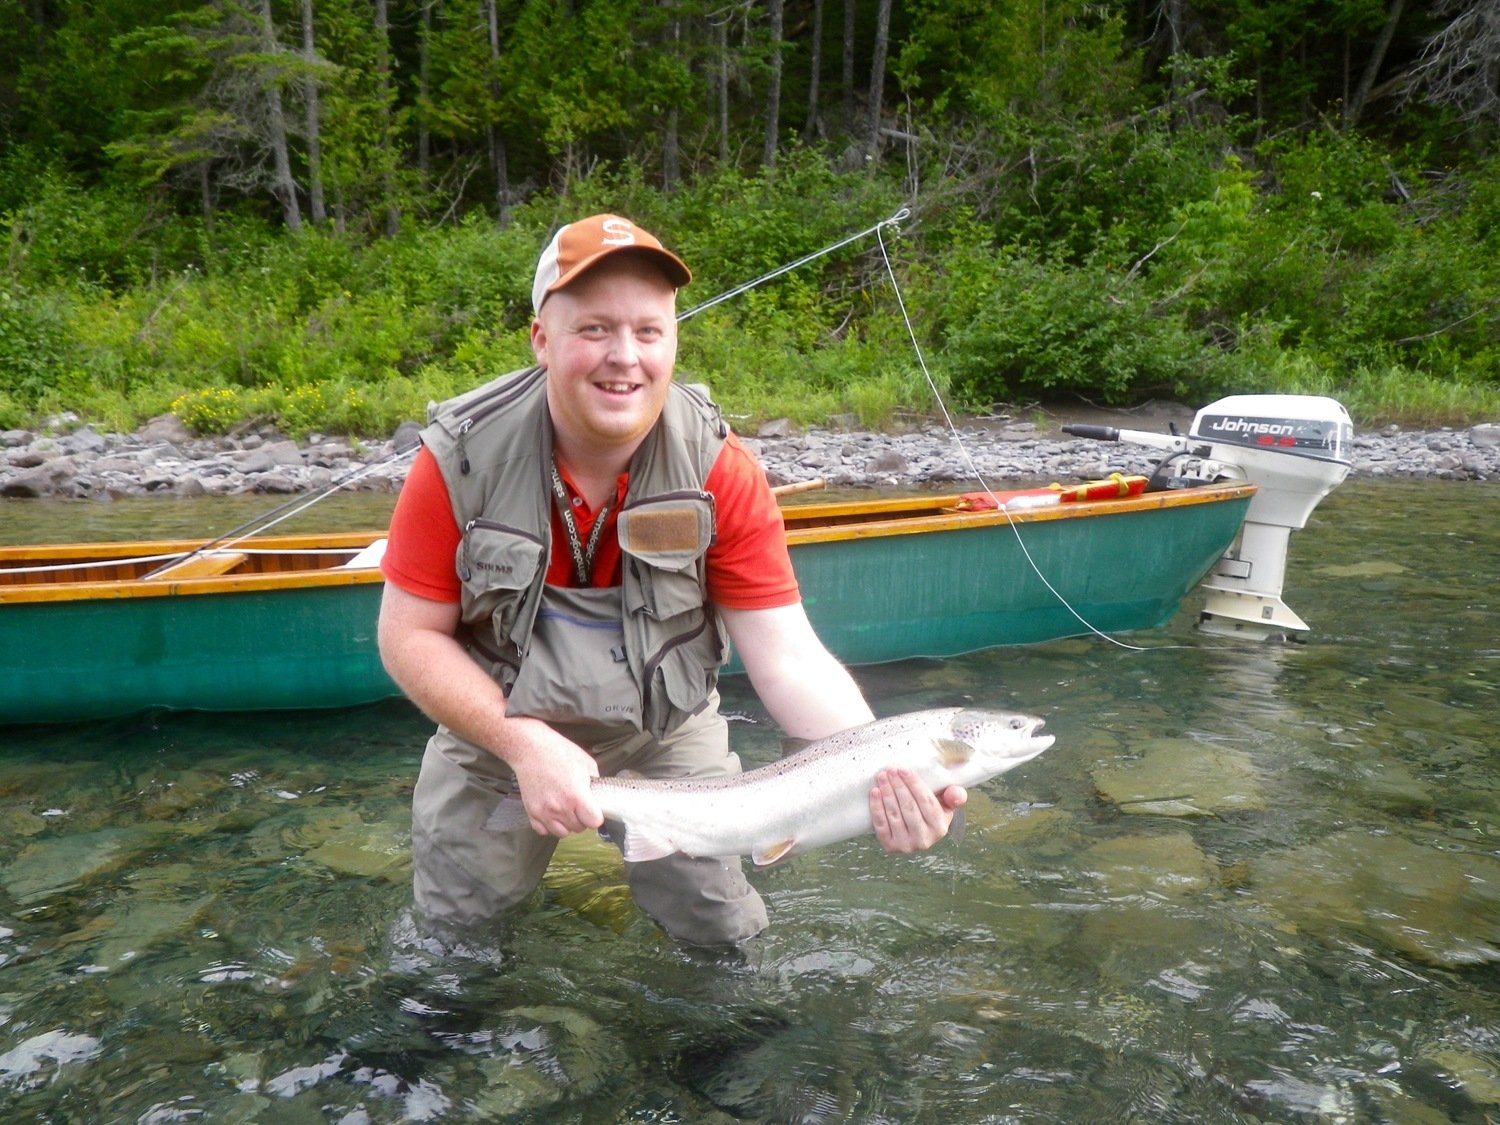 Paul again with a nice fresh Salmon from Camp Bonaventure Fishing Report